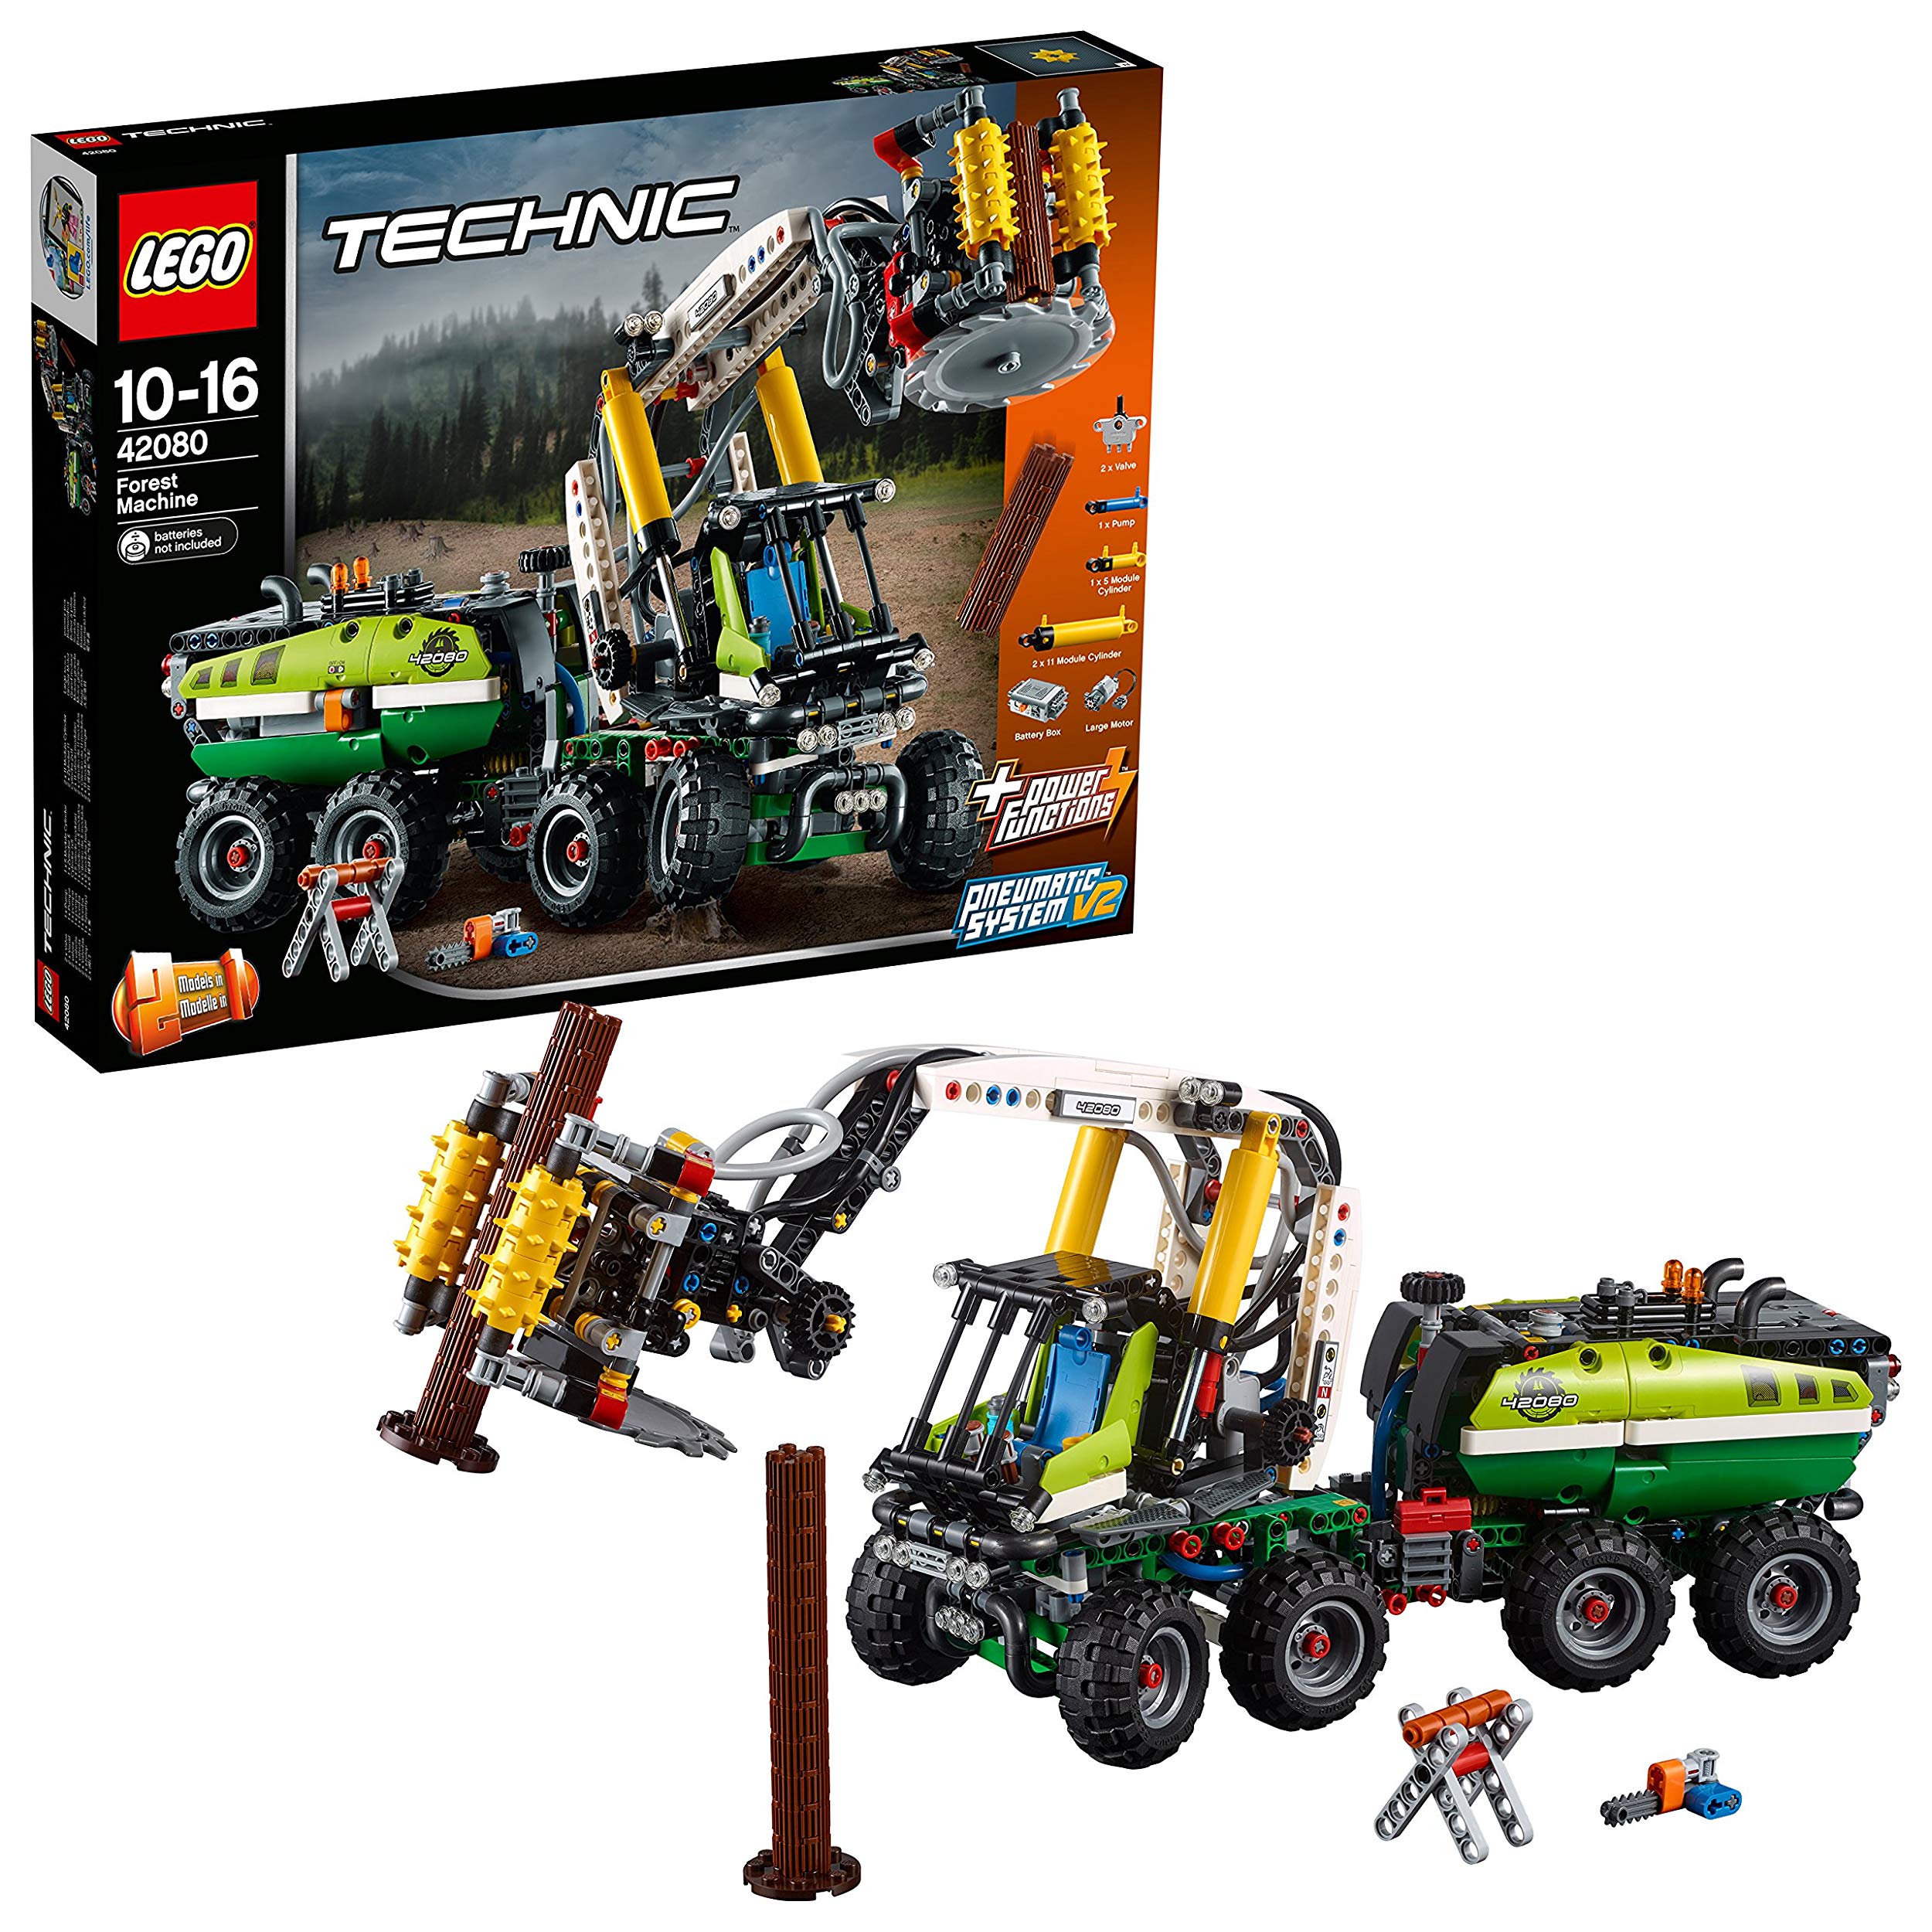 Lego Technic Harvester Forest Machine Construction Toy